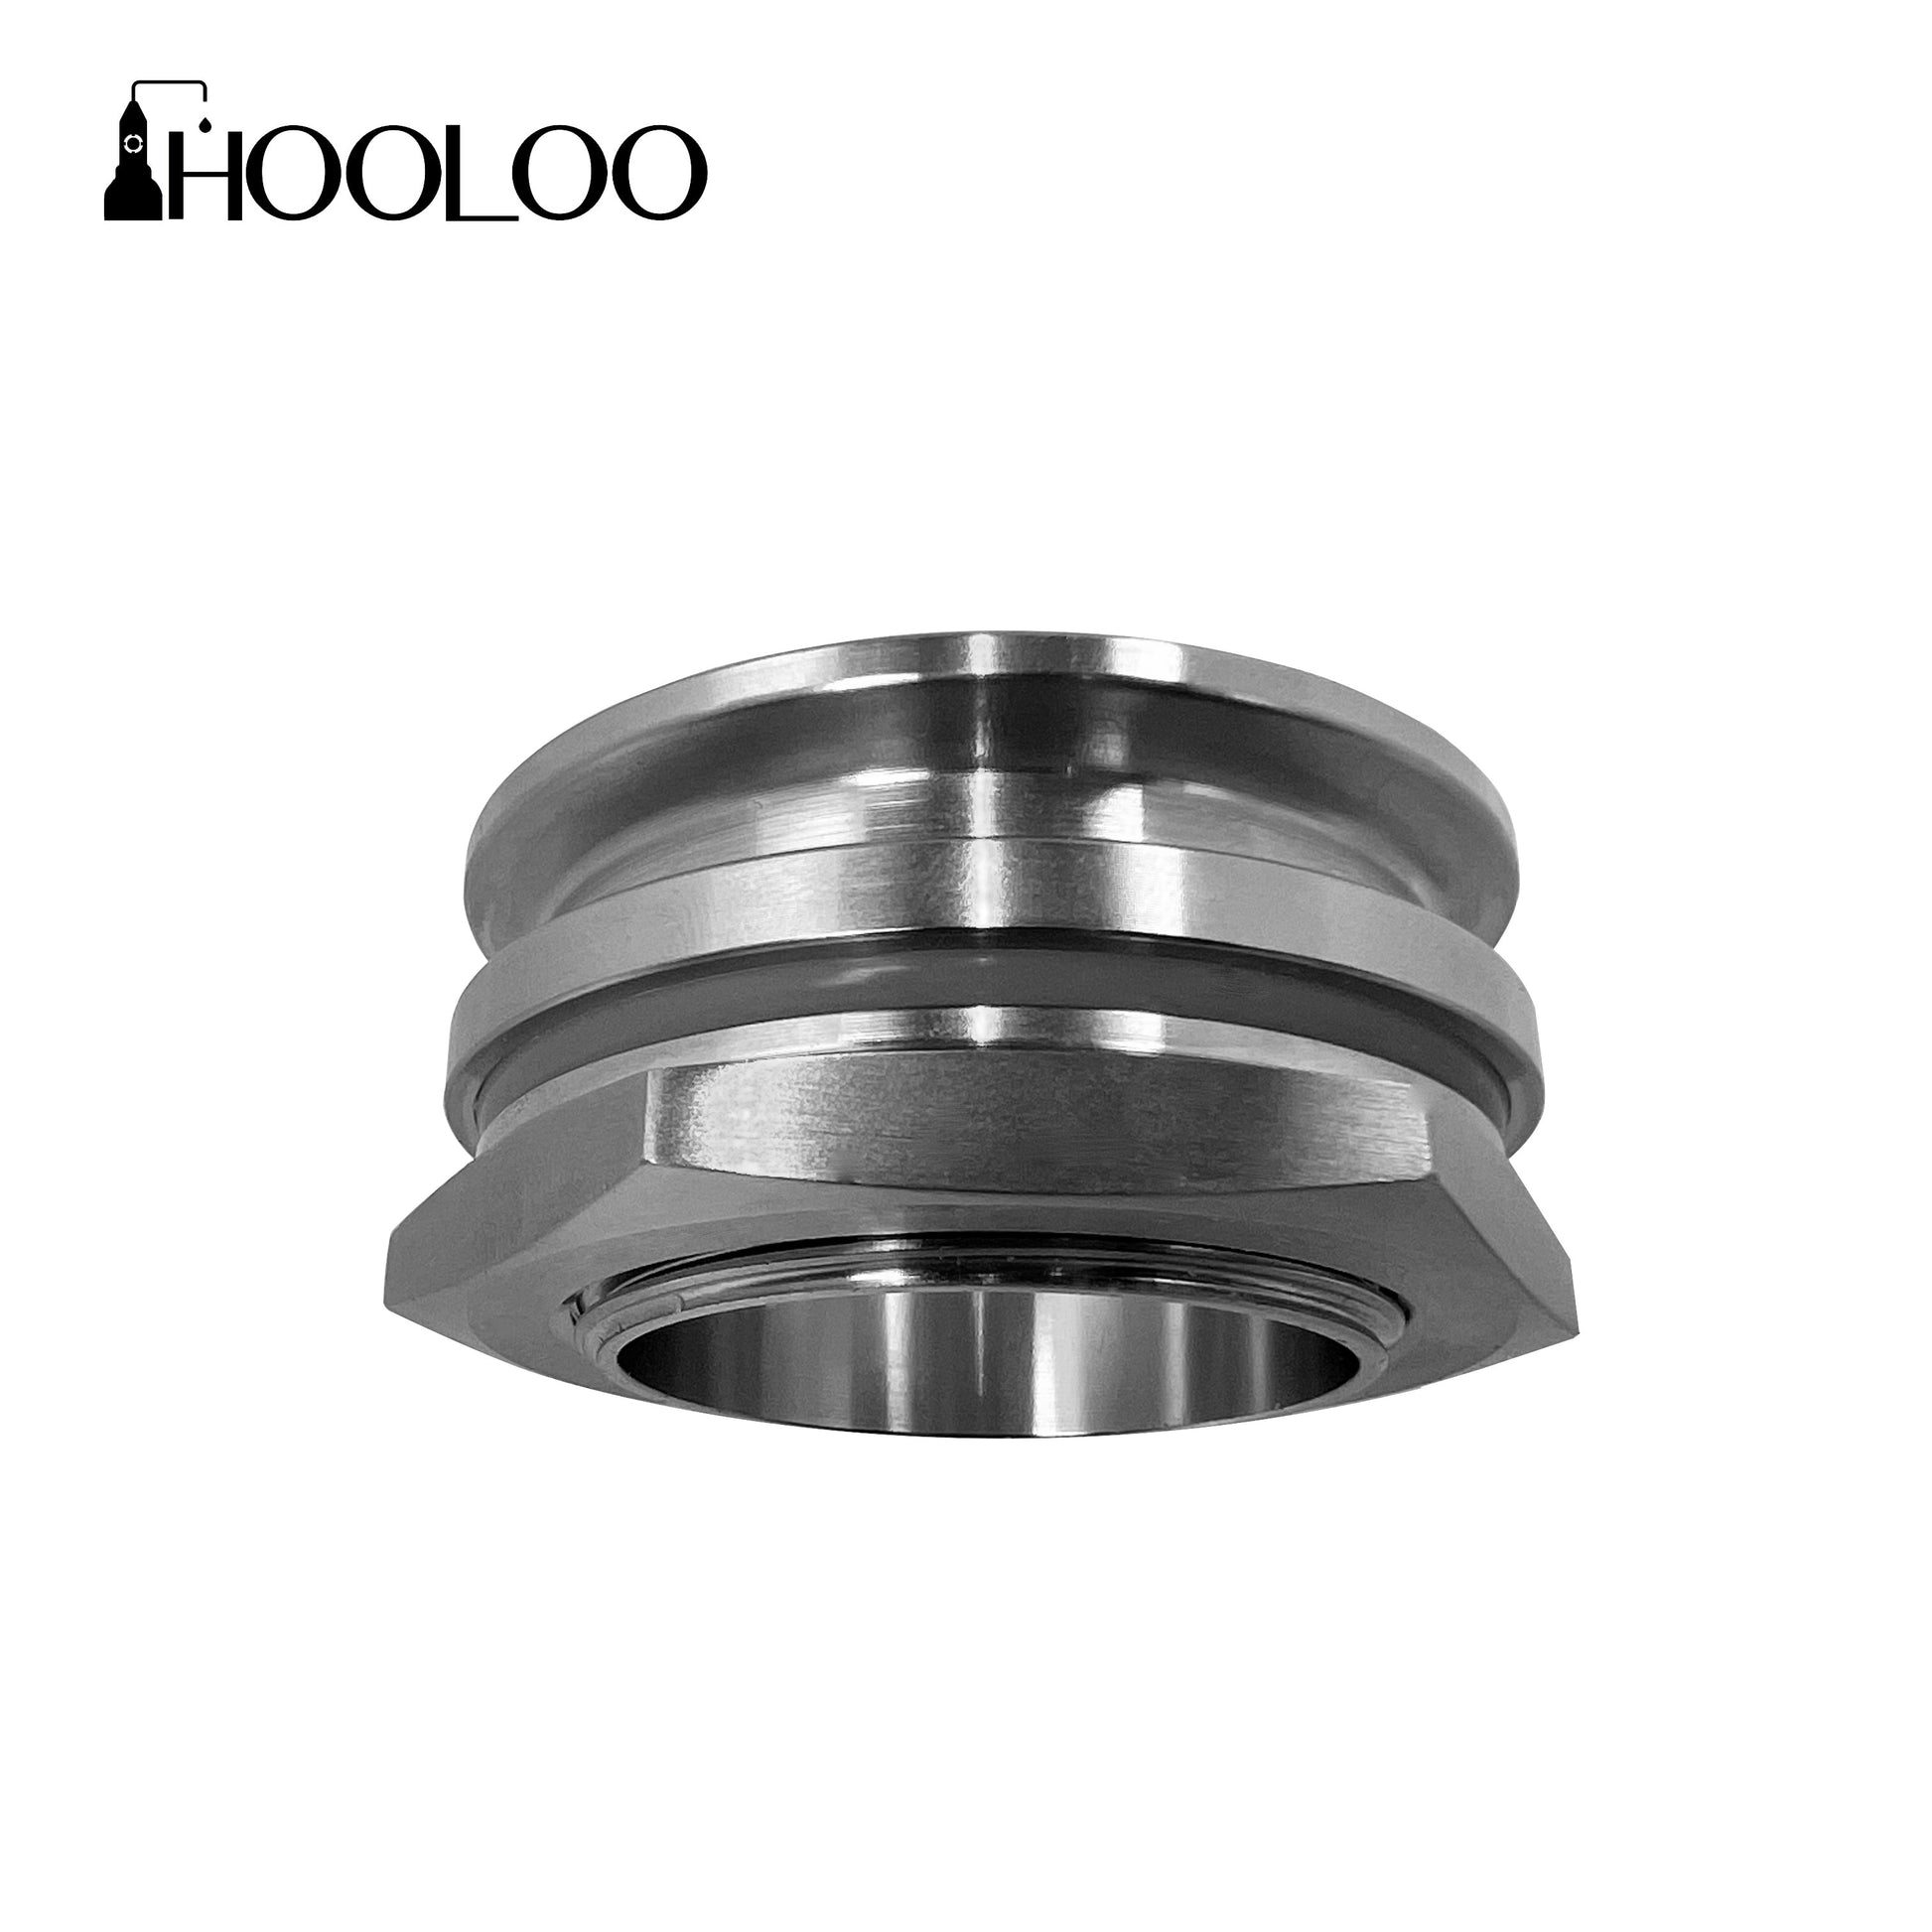 Tri-clamp Adapter - Hooloo Distilling Equipment Supply